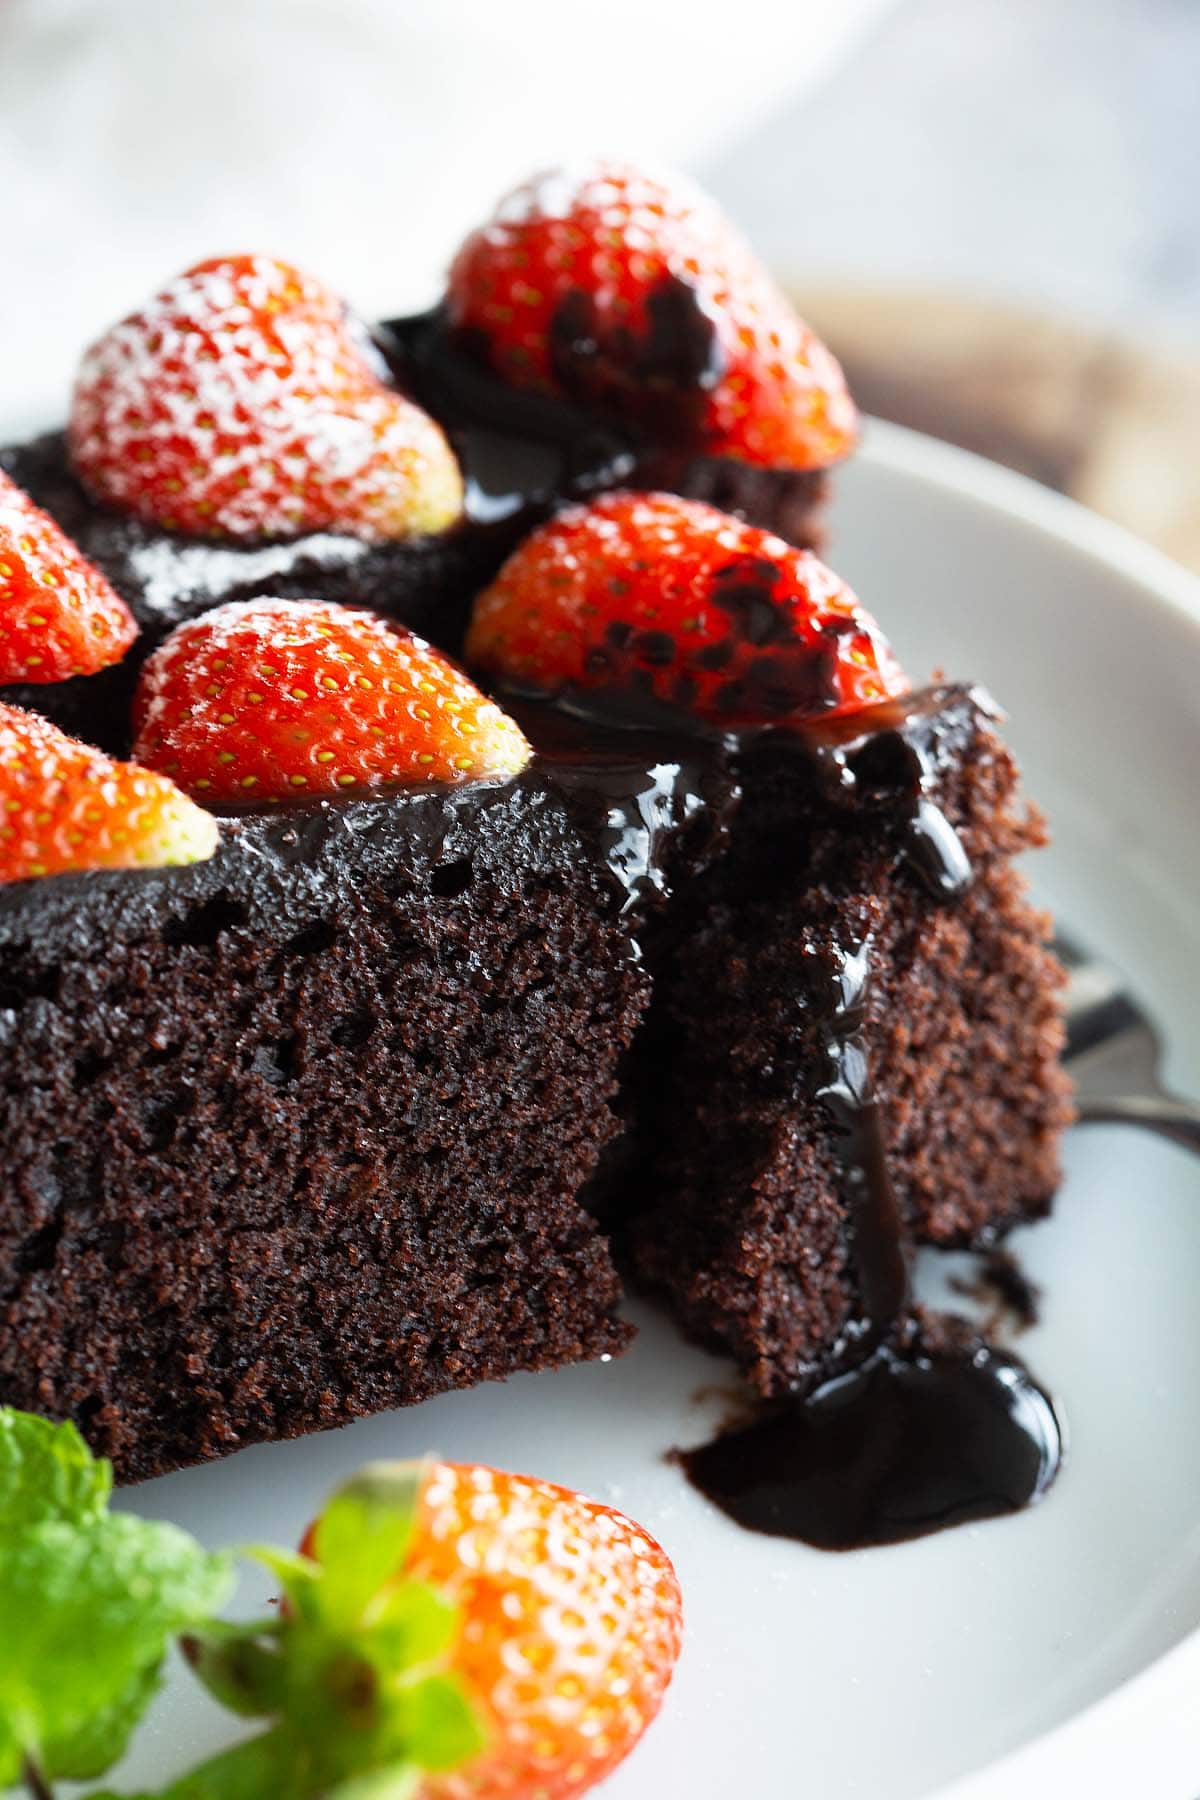 Pieces of moist chocolate cake with chocolate sauce dripping off and strawberries on top served in a plate. 